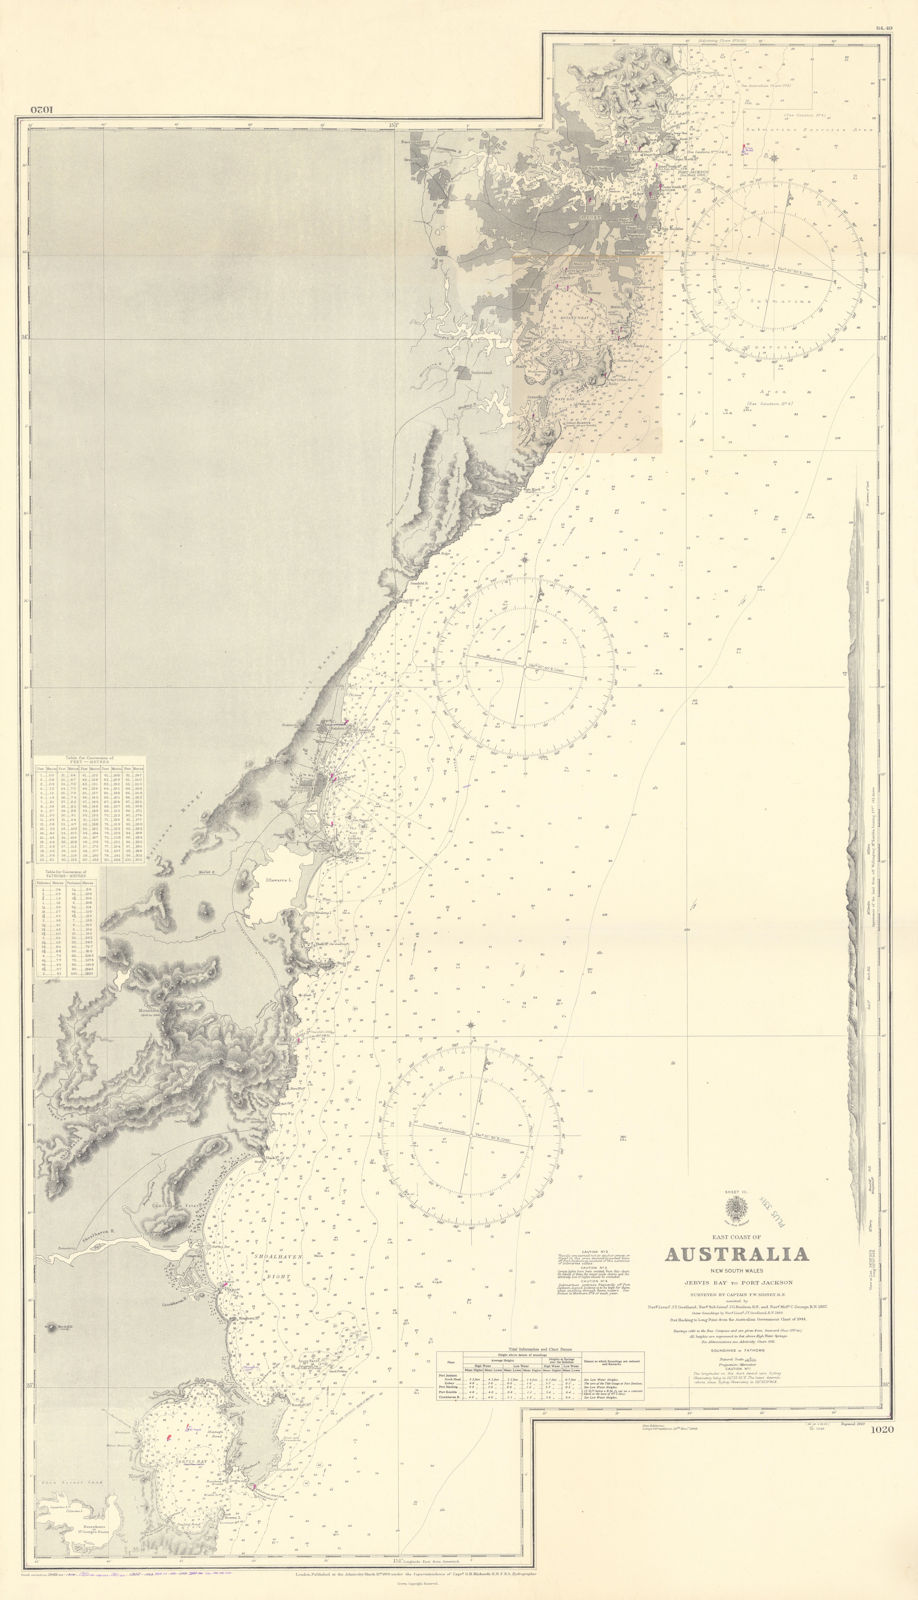 New South Wales coast. Jervis Bay to Sydney. ADMIRALTY sea chart 1869 (1955) map